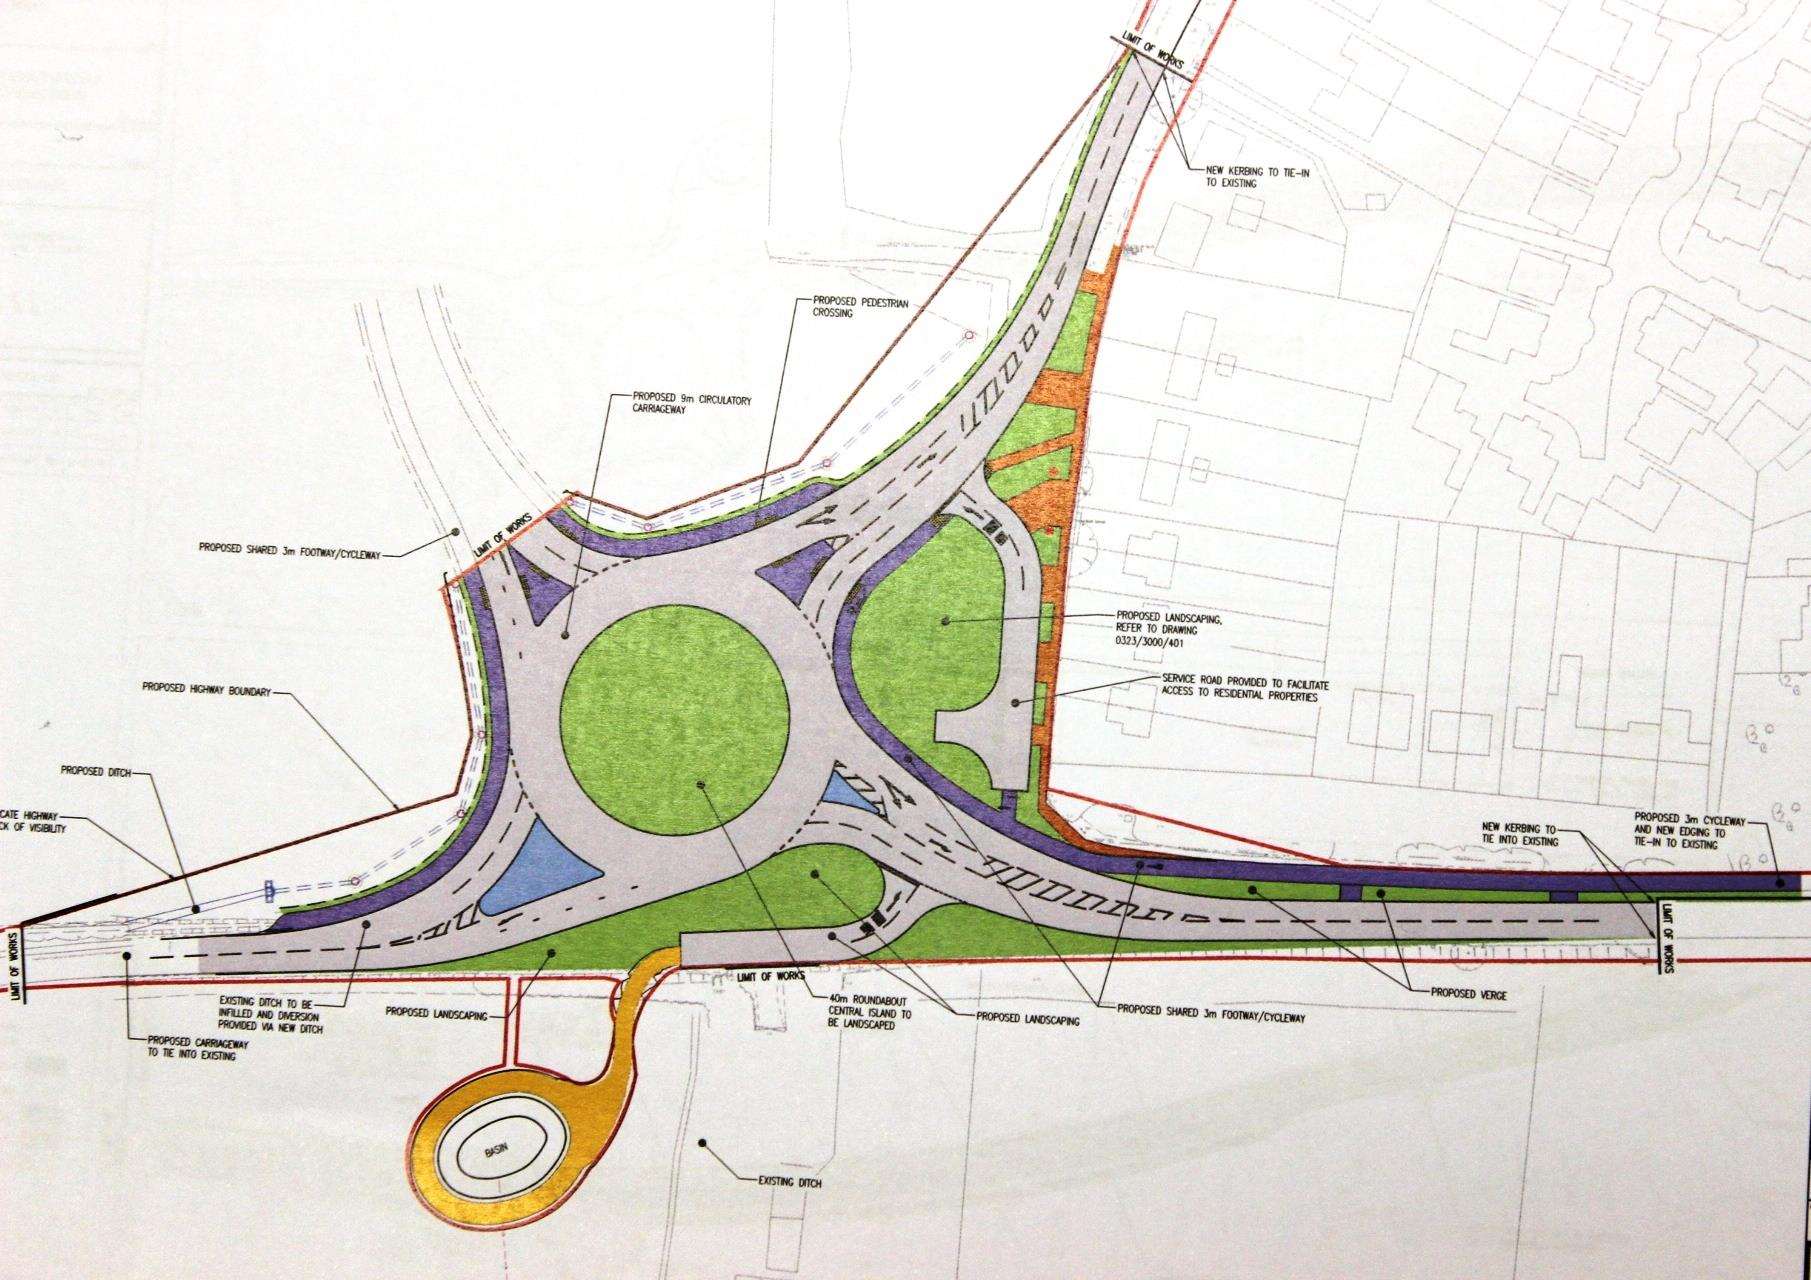 Plan of new roundabout (5034068)